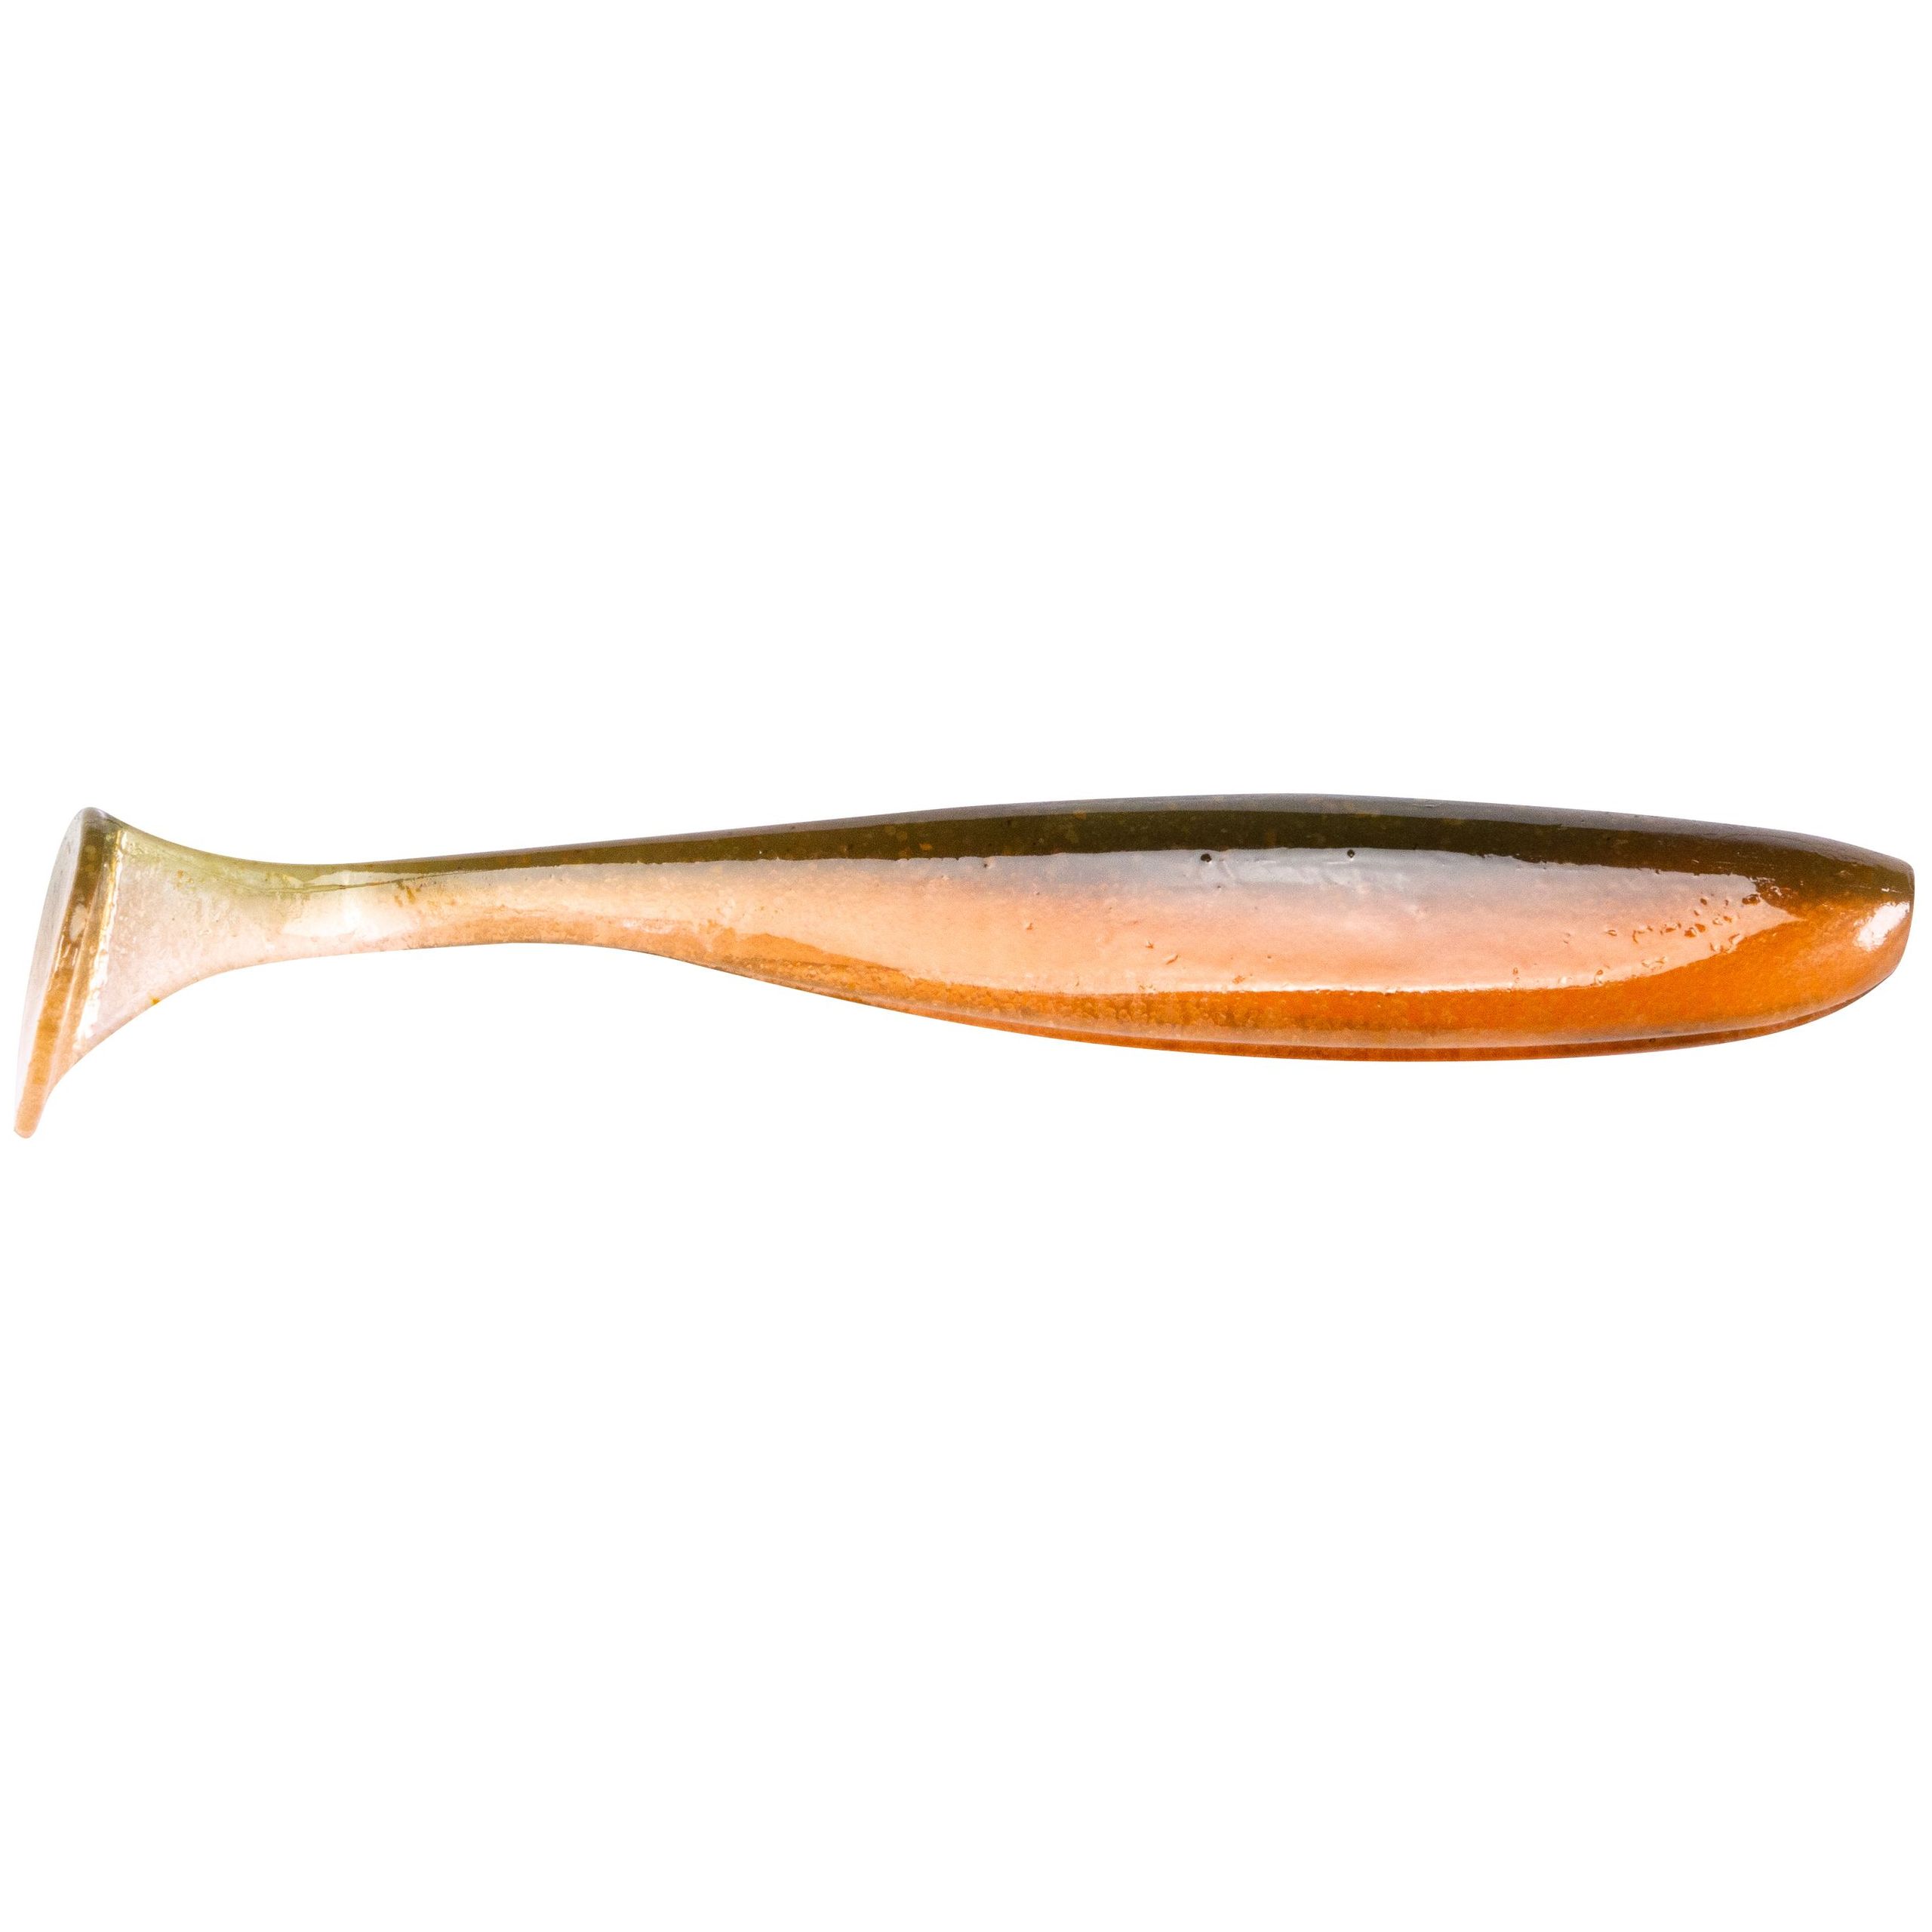 Lure Keitech Easy Shiner 2' Electric Sha - Basil Manning